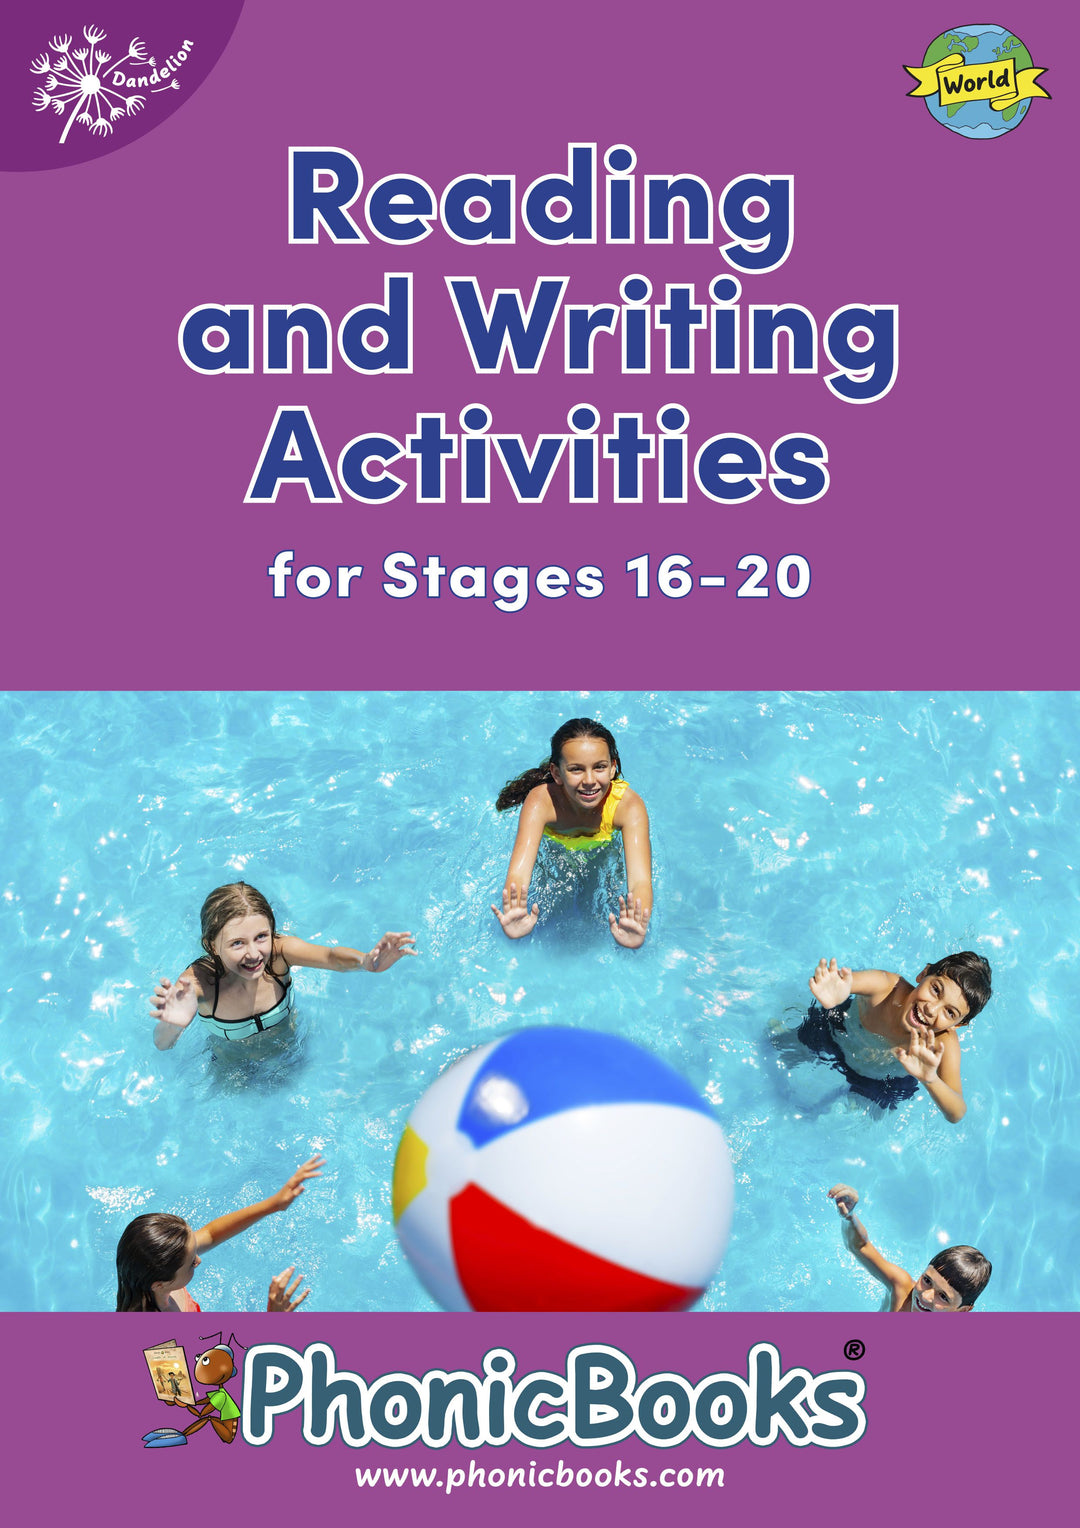 Dandelion World Reading and Writing Activities for Stages 16-20